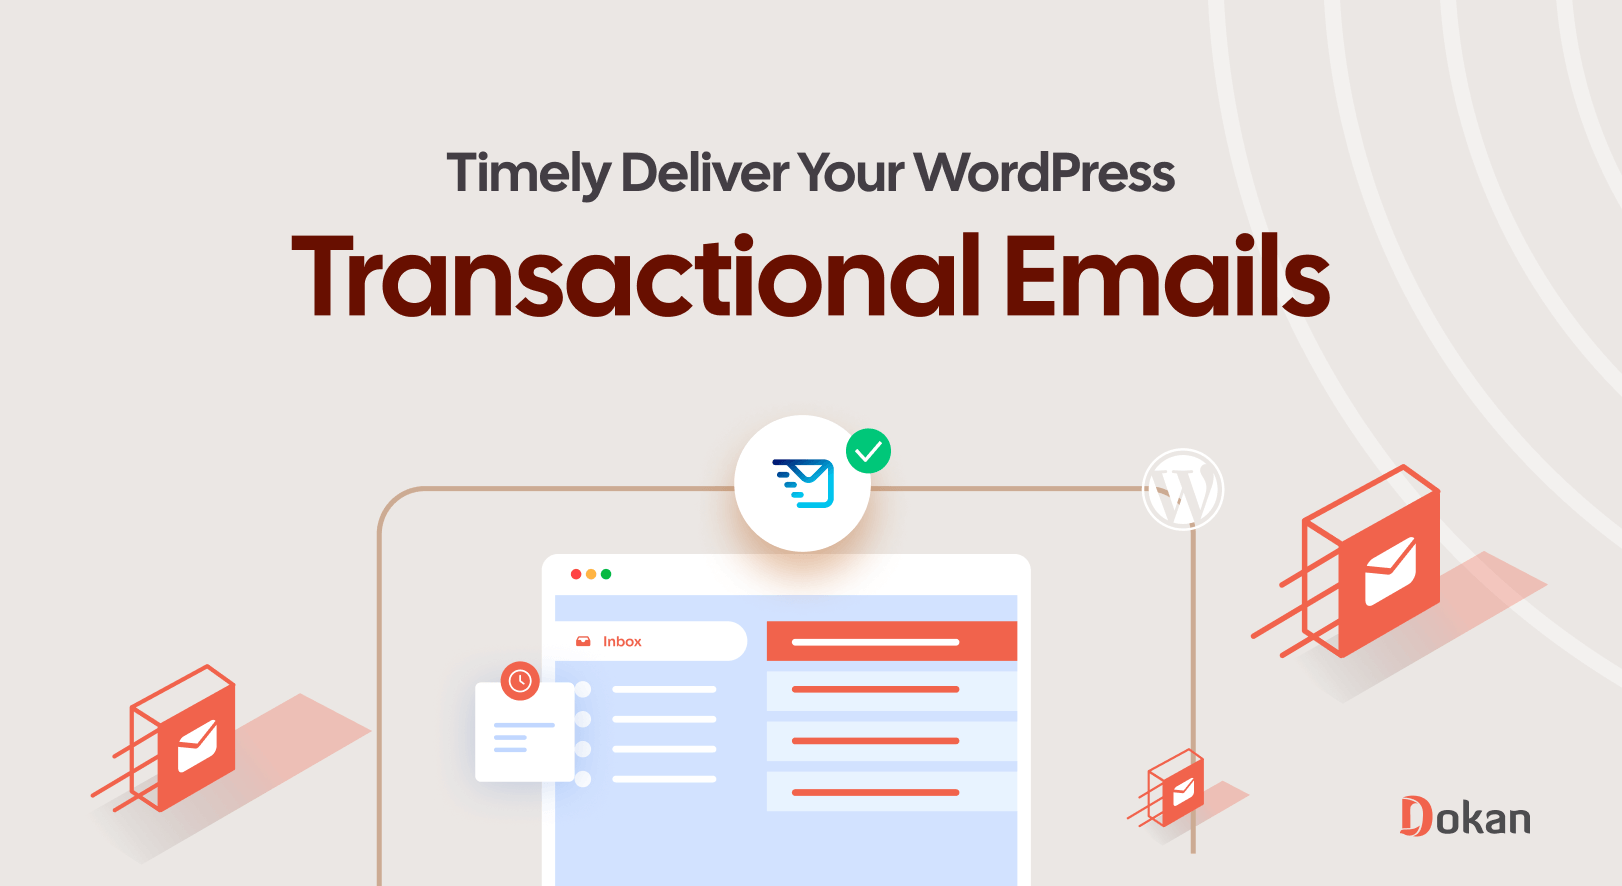 Introducing InboxWP – Take Your WordPress Transactional Email Delivery to a New Level